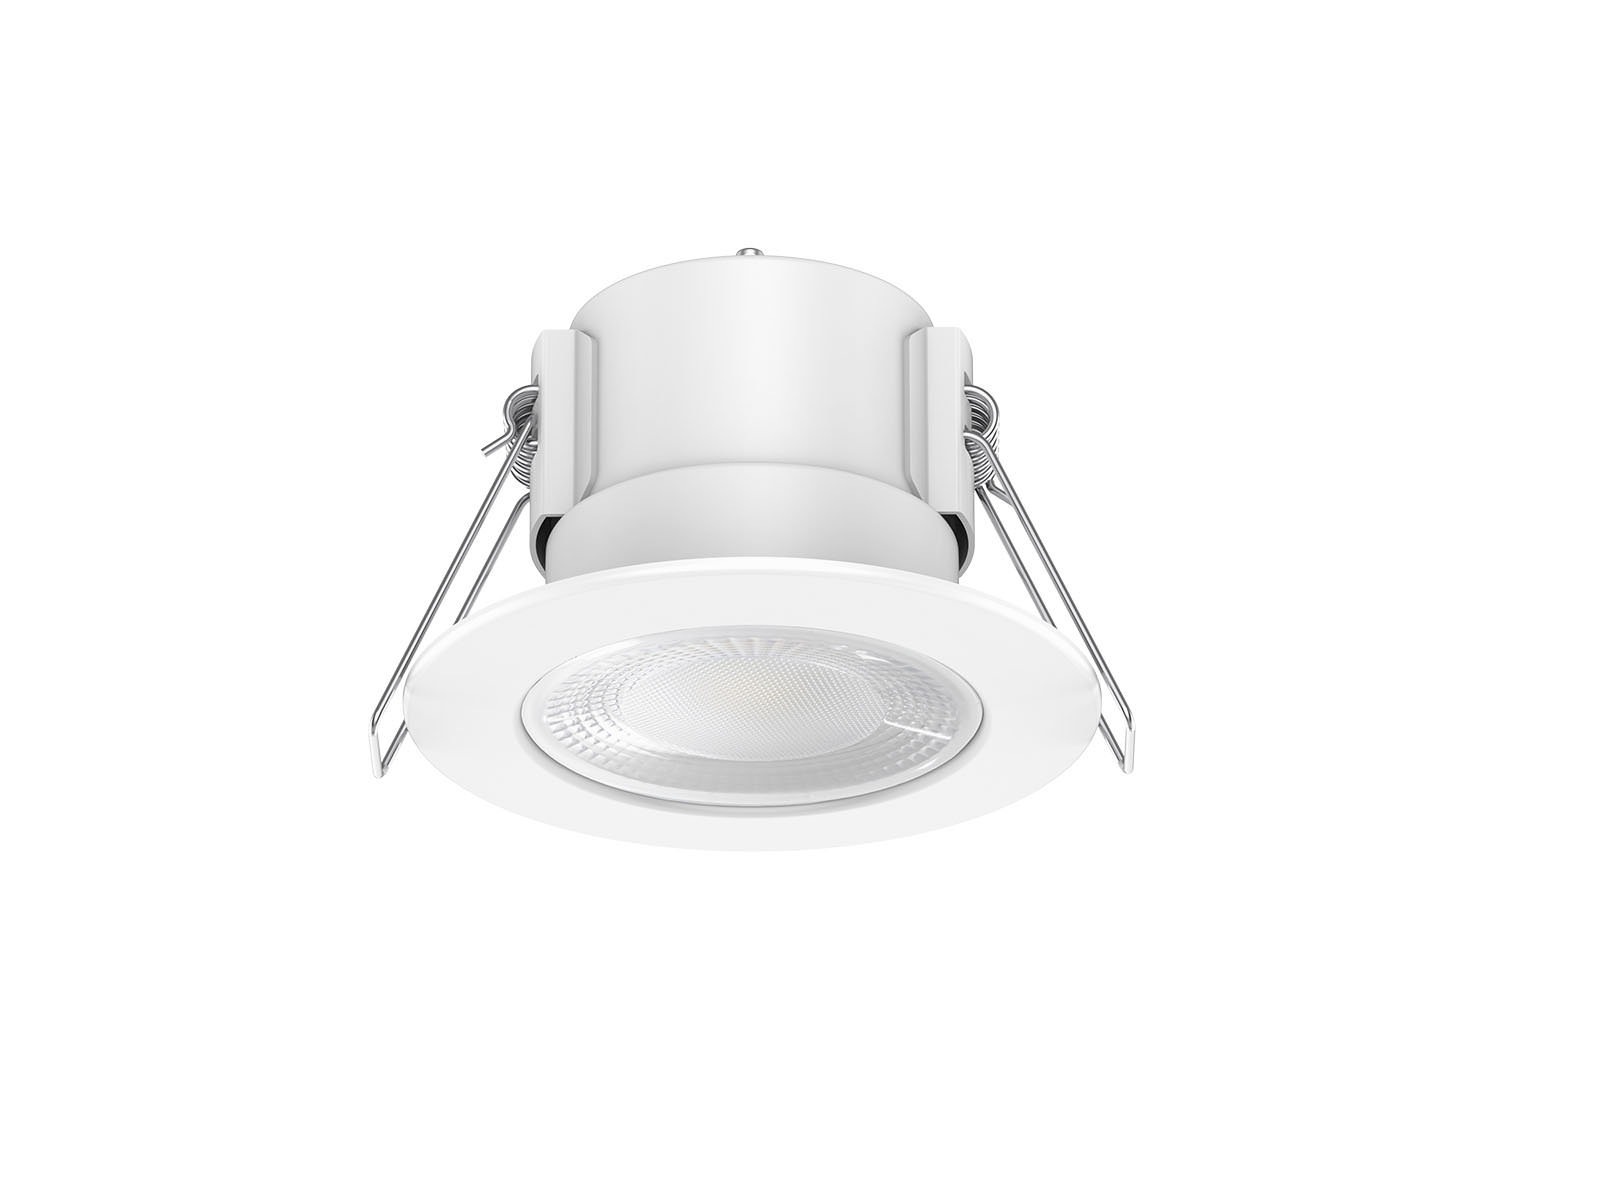 DL354 LED Downlight Adopts High Efficiency SMD Light Source